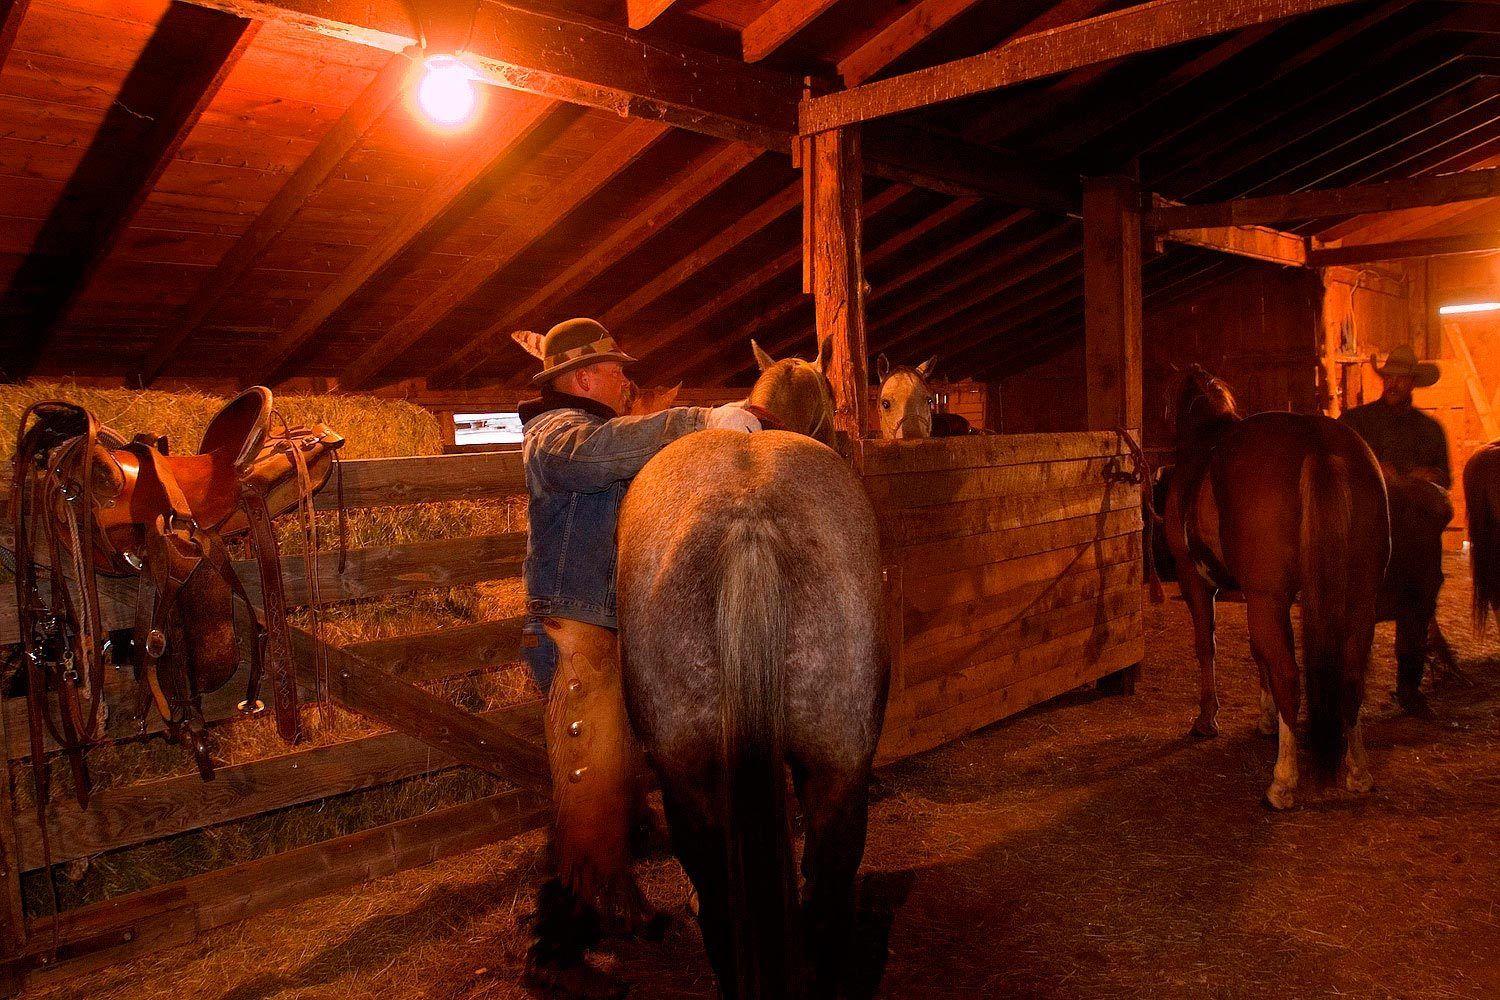 Saddling up prior to a cattle roundup in the Wet Mountain Valley of Colorado near Westcliffe, 50 miles due west of Pueblo